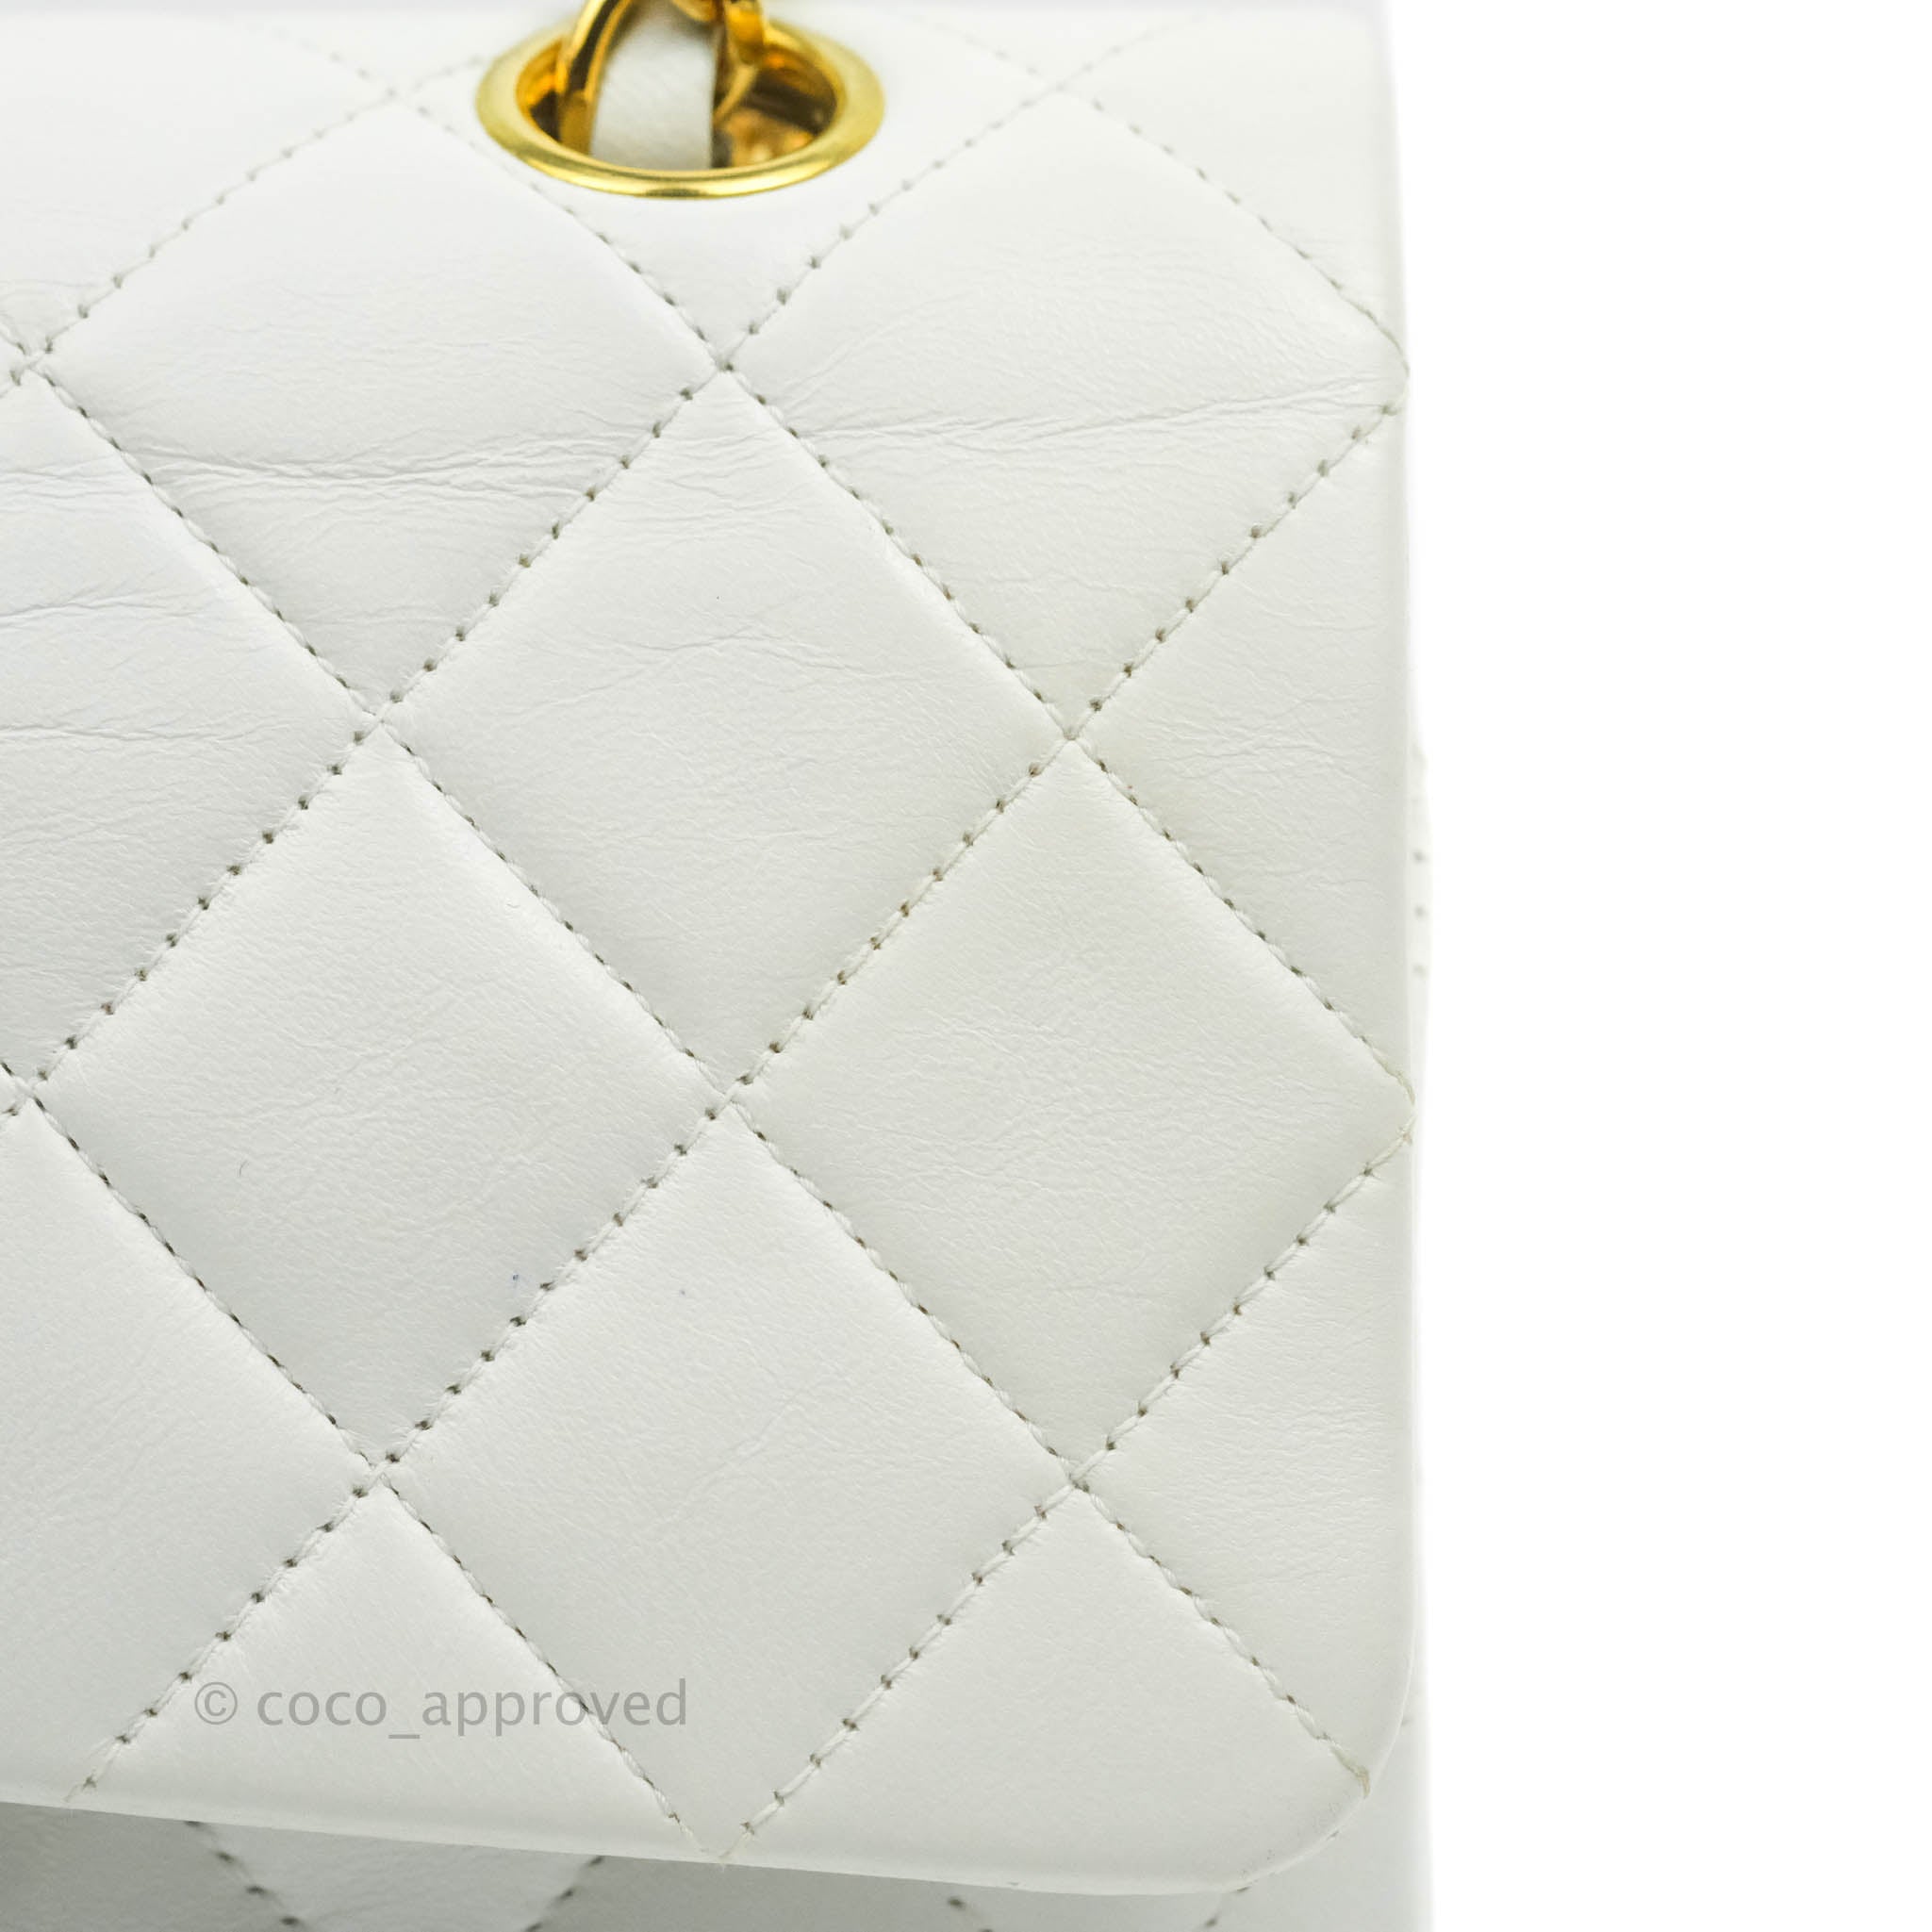 Chanel Classic Vintage Small S/M Flap White Lambskin 24K Gold